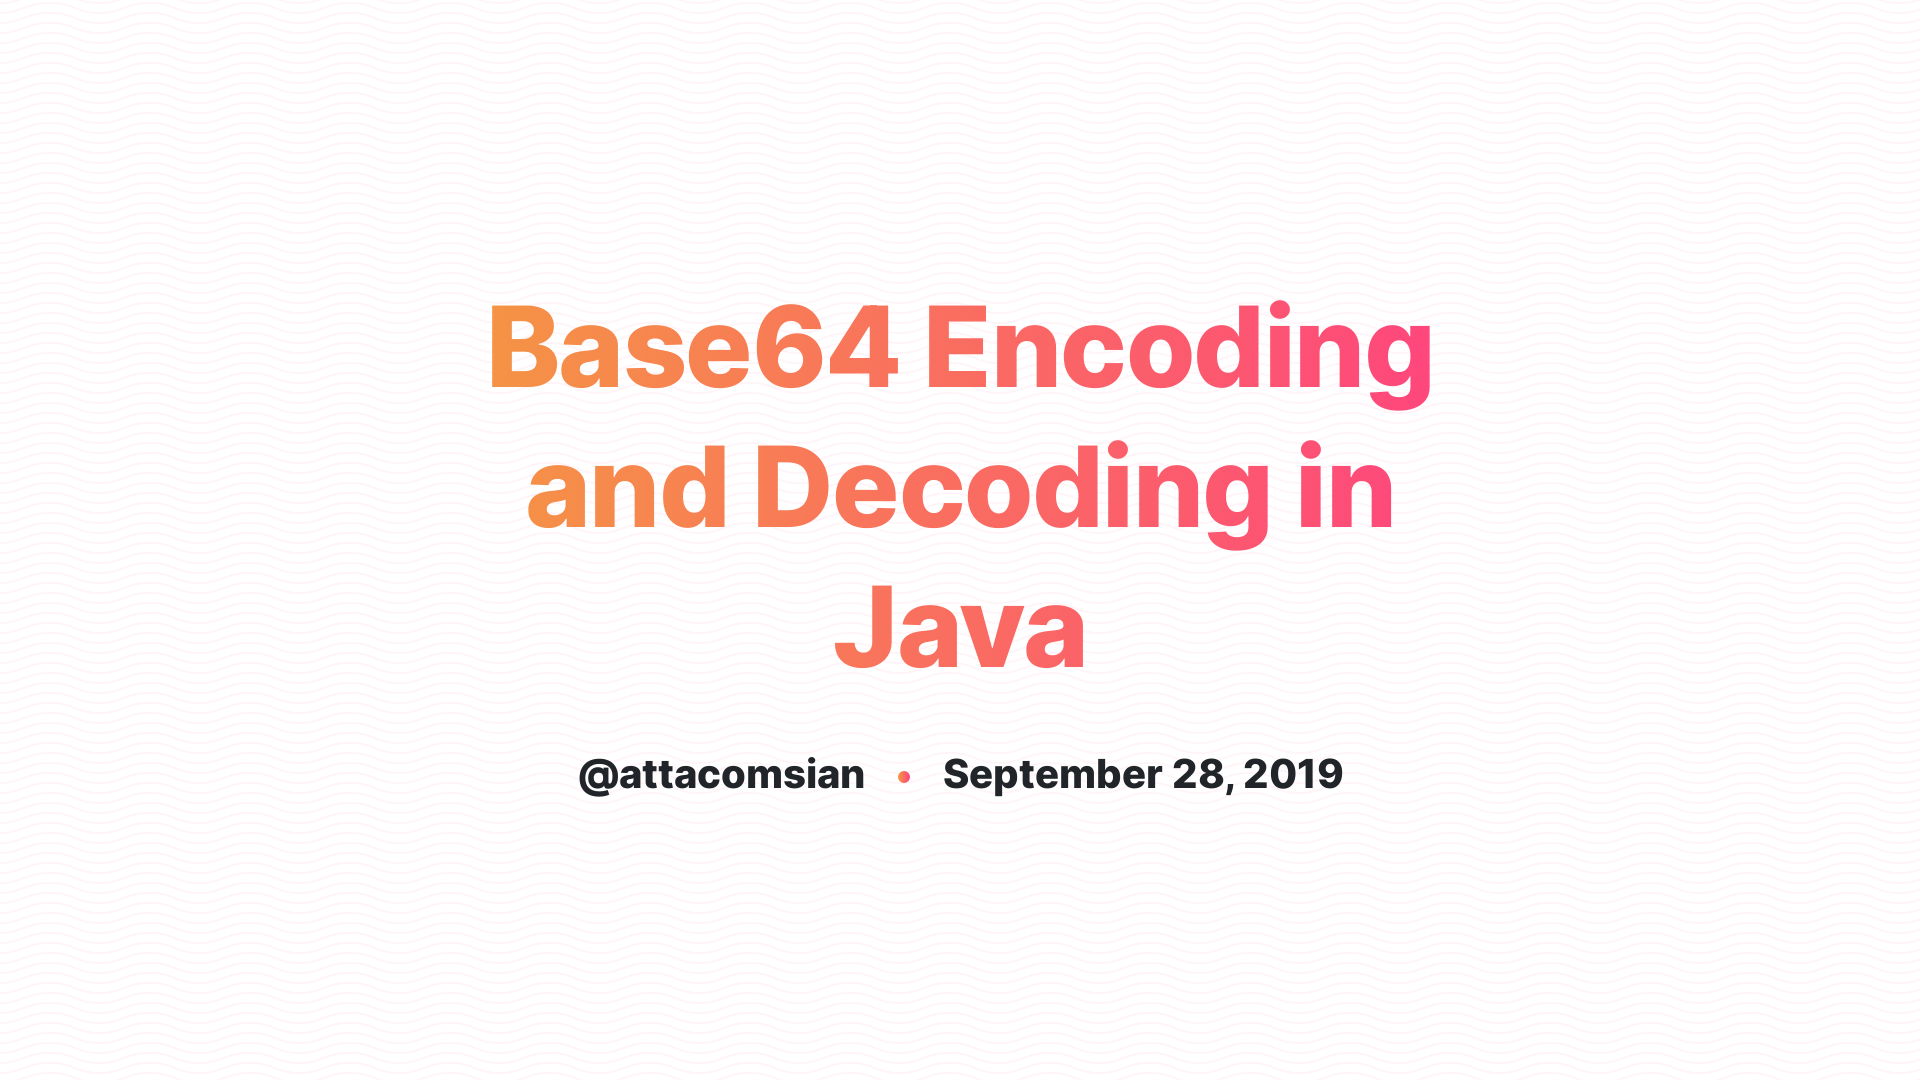 Java 8 Base64 Encoding and Decoding (With Examples) | JavaProgramTo.com